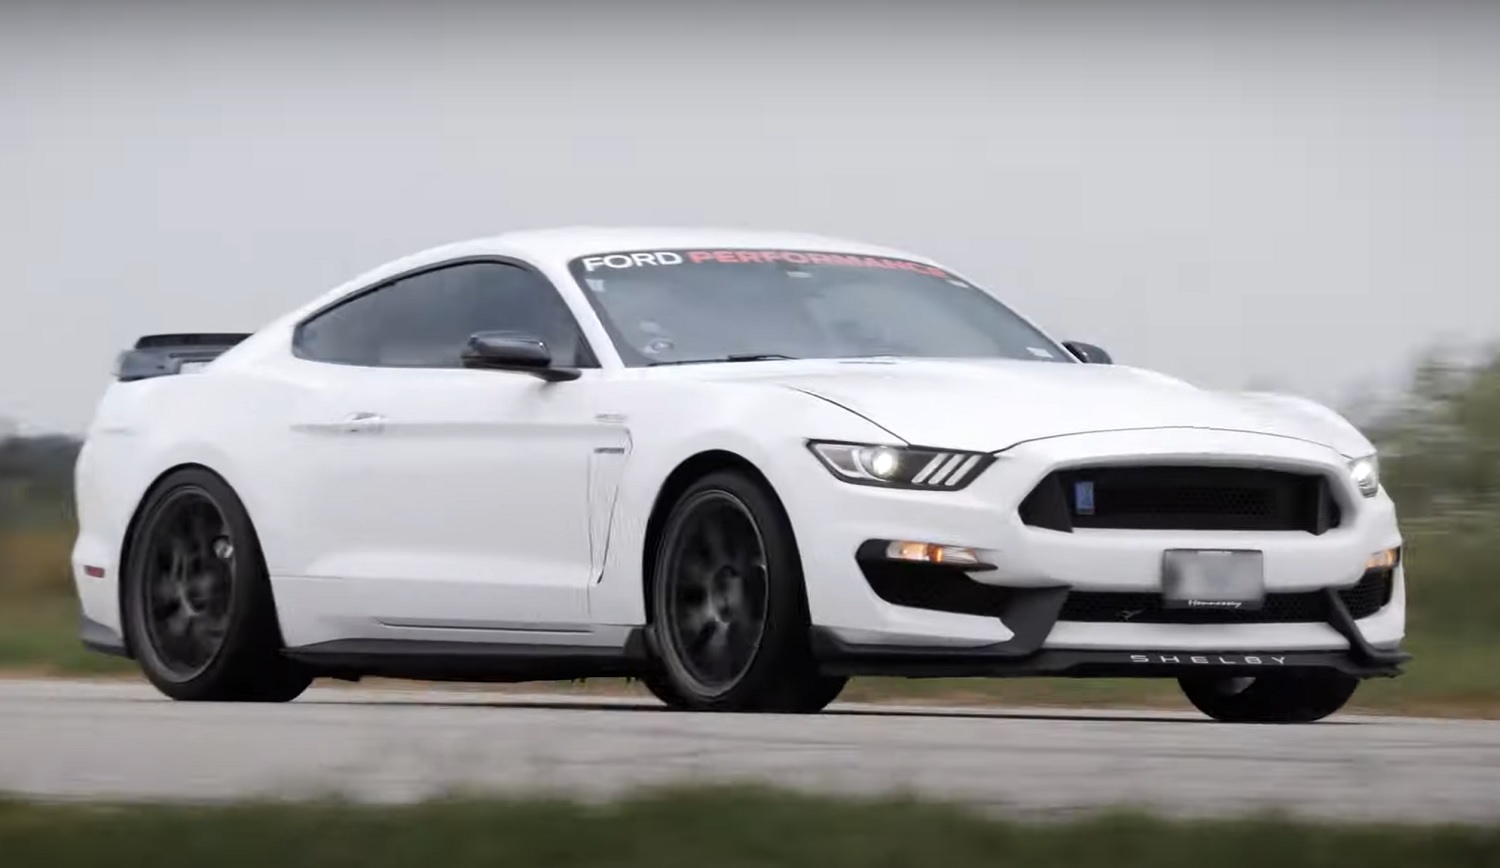 New Owner Takes First Ride In Hennessey Hpe850 Shelby Gt350 Video 8207